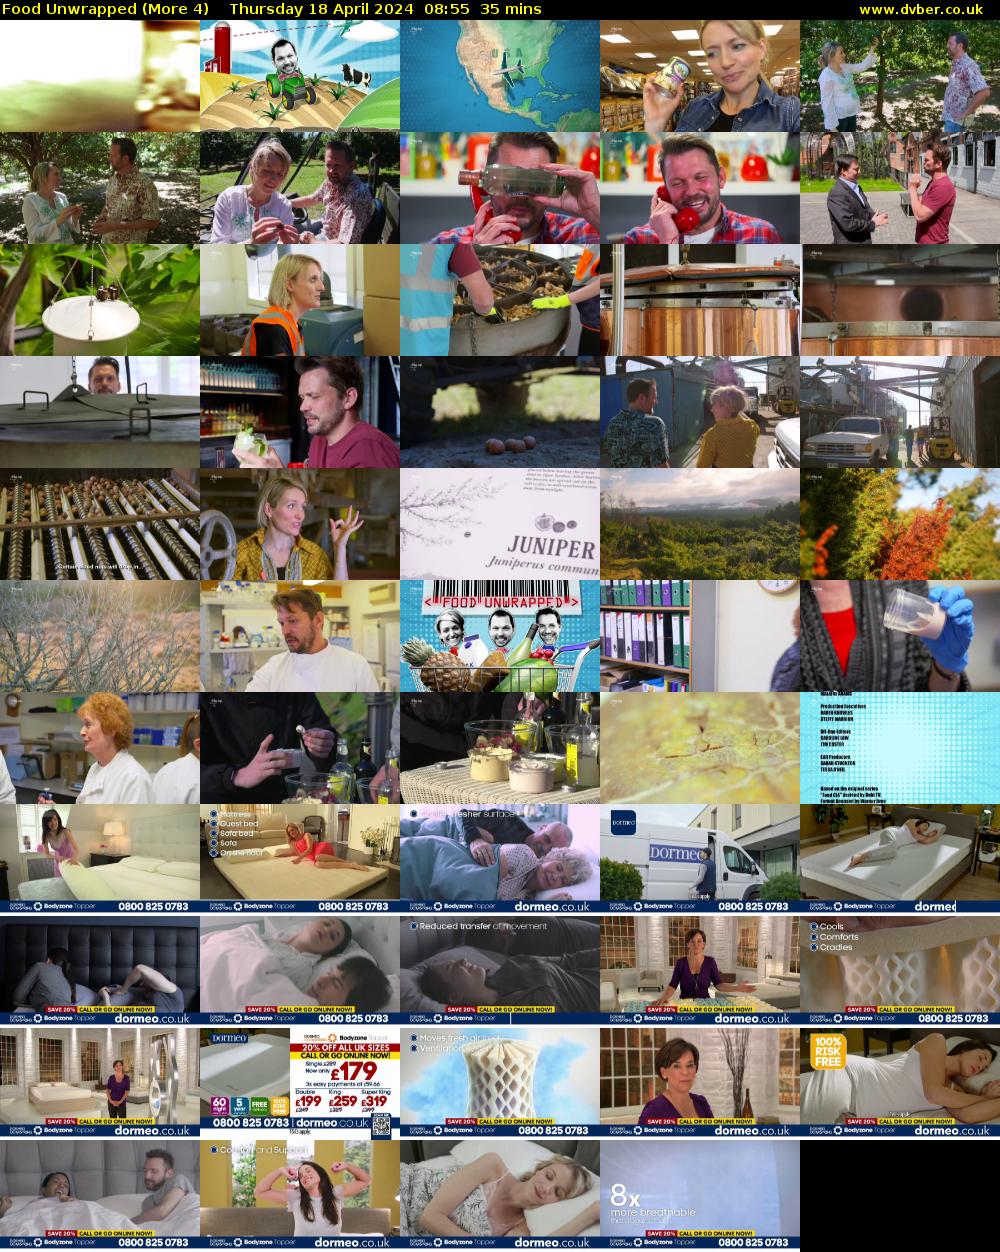 Food Unwrapped (More 4) Thursday 18 April 2024 08:55 - 09:30